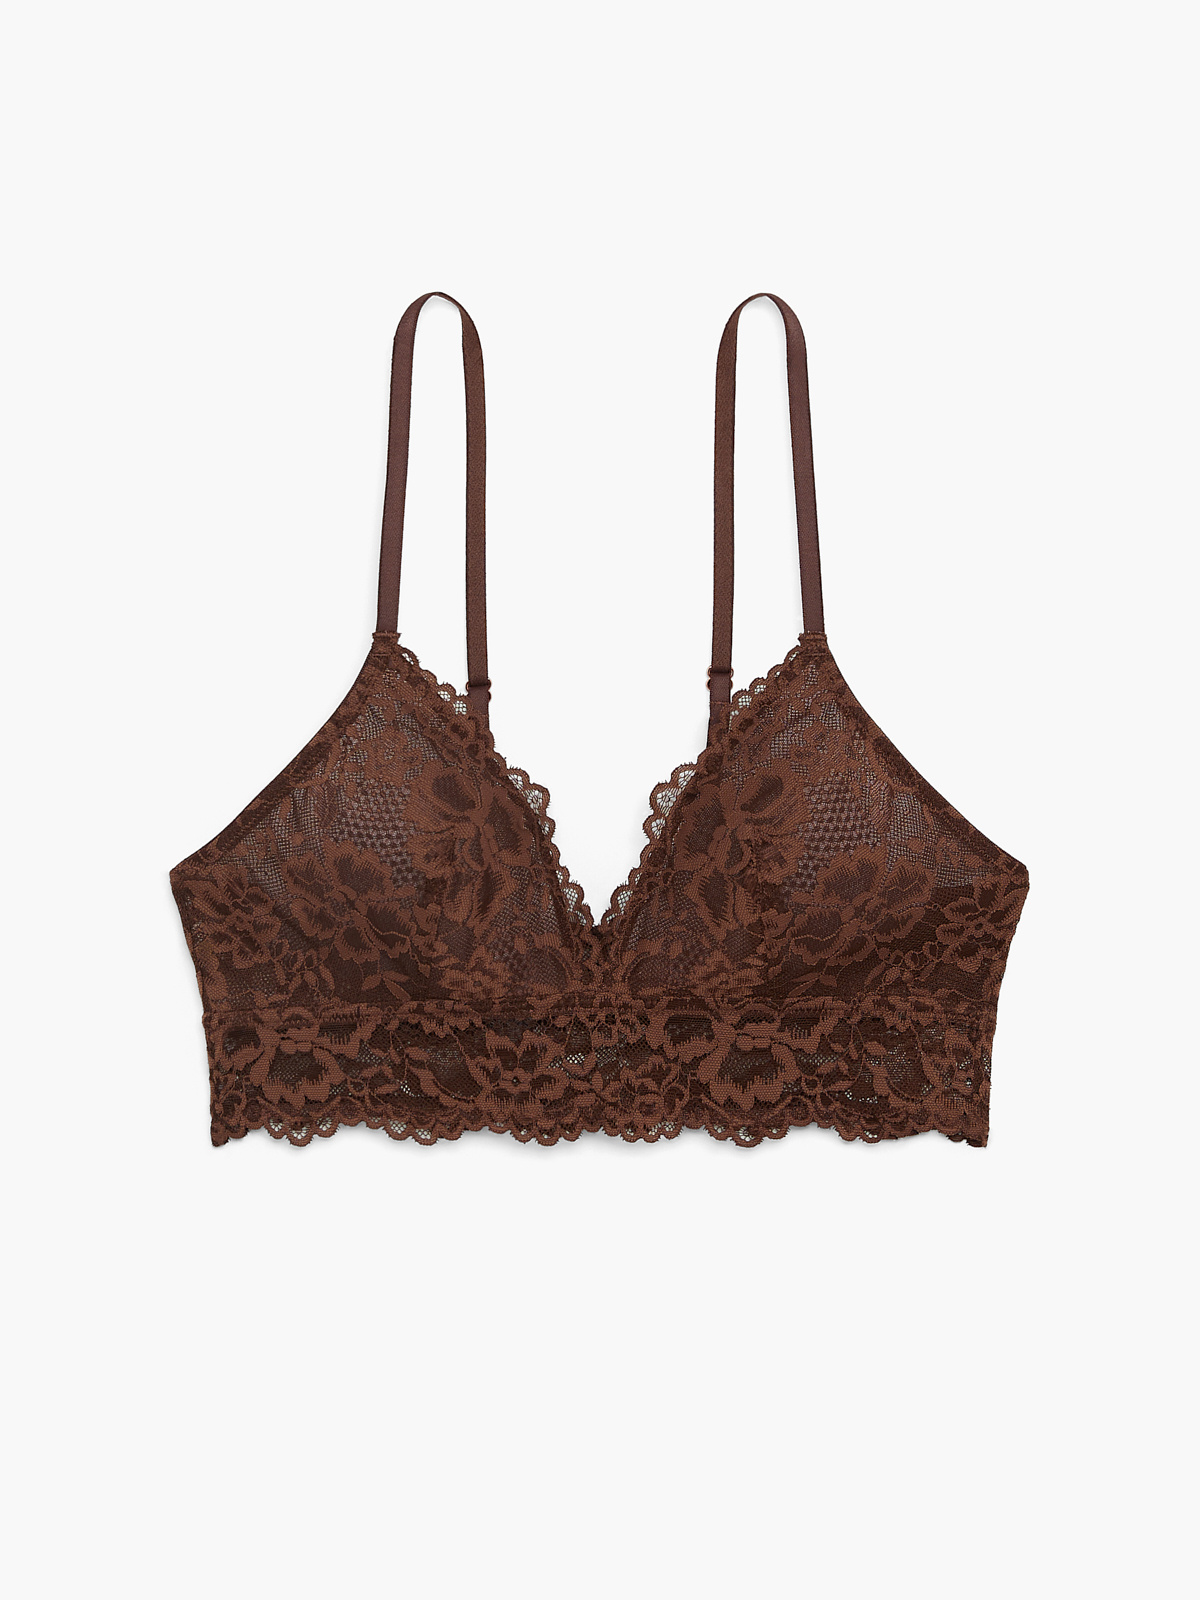 https://cdn.savagex.com/media/images/products/BB2355181-6458/FLORAL-LACE-TRIANGLE-BRALETTE-BB2355181-6458-LAYDOWN-1200x1600.jpg